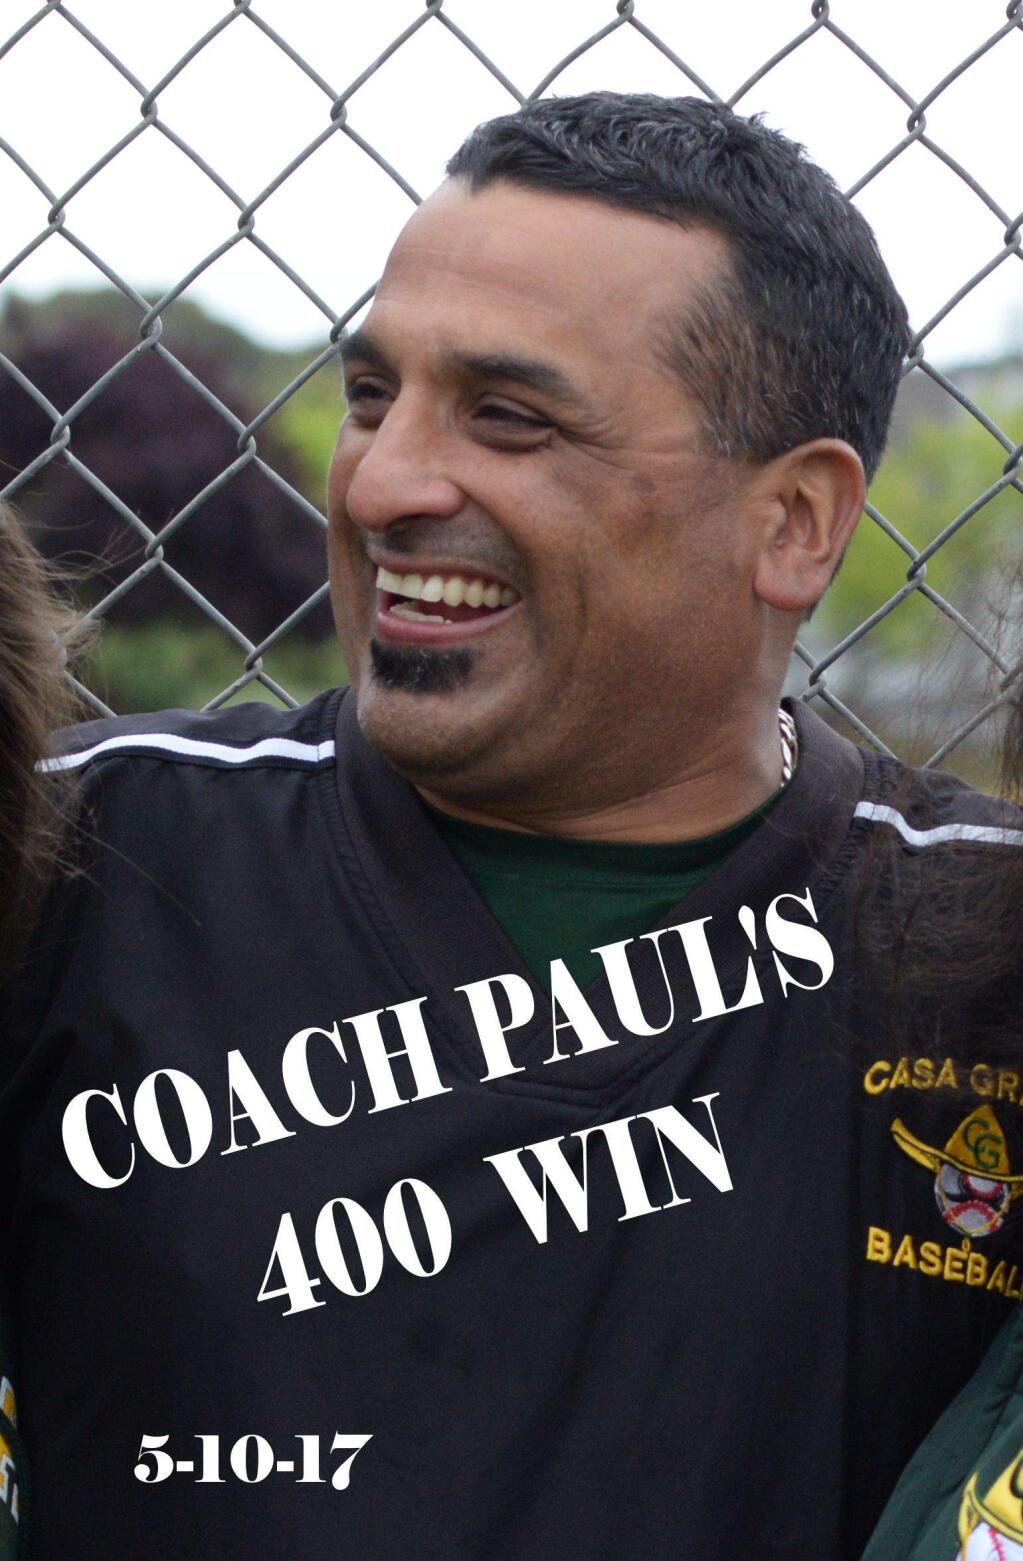 Paul Maytorena has a reason to smile. His Gauchos have just beaten Rancho Cotate to give him the 400th victory of his varsity coaching career. (SUMNER FOWLER/ FOR THE ARGUS-COURIER)